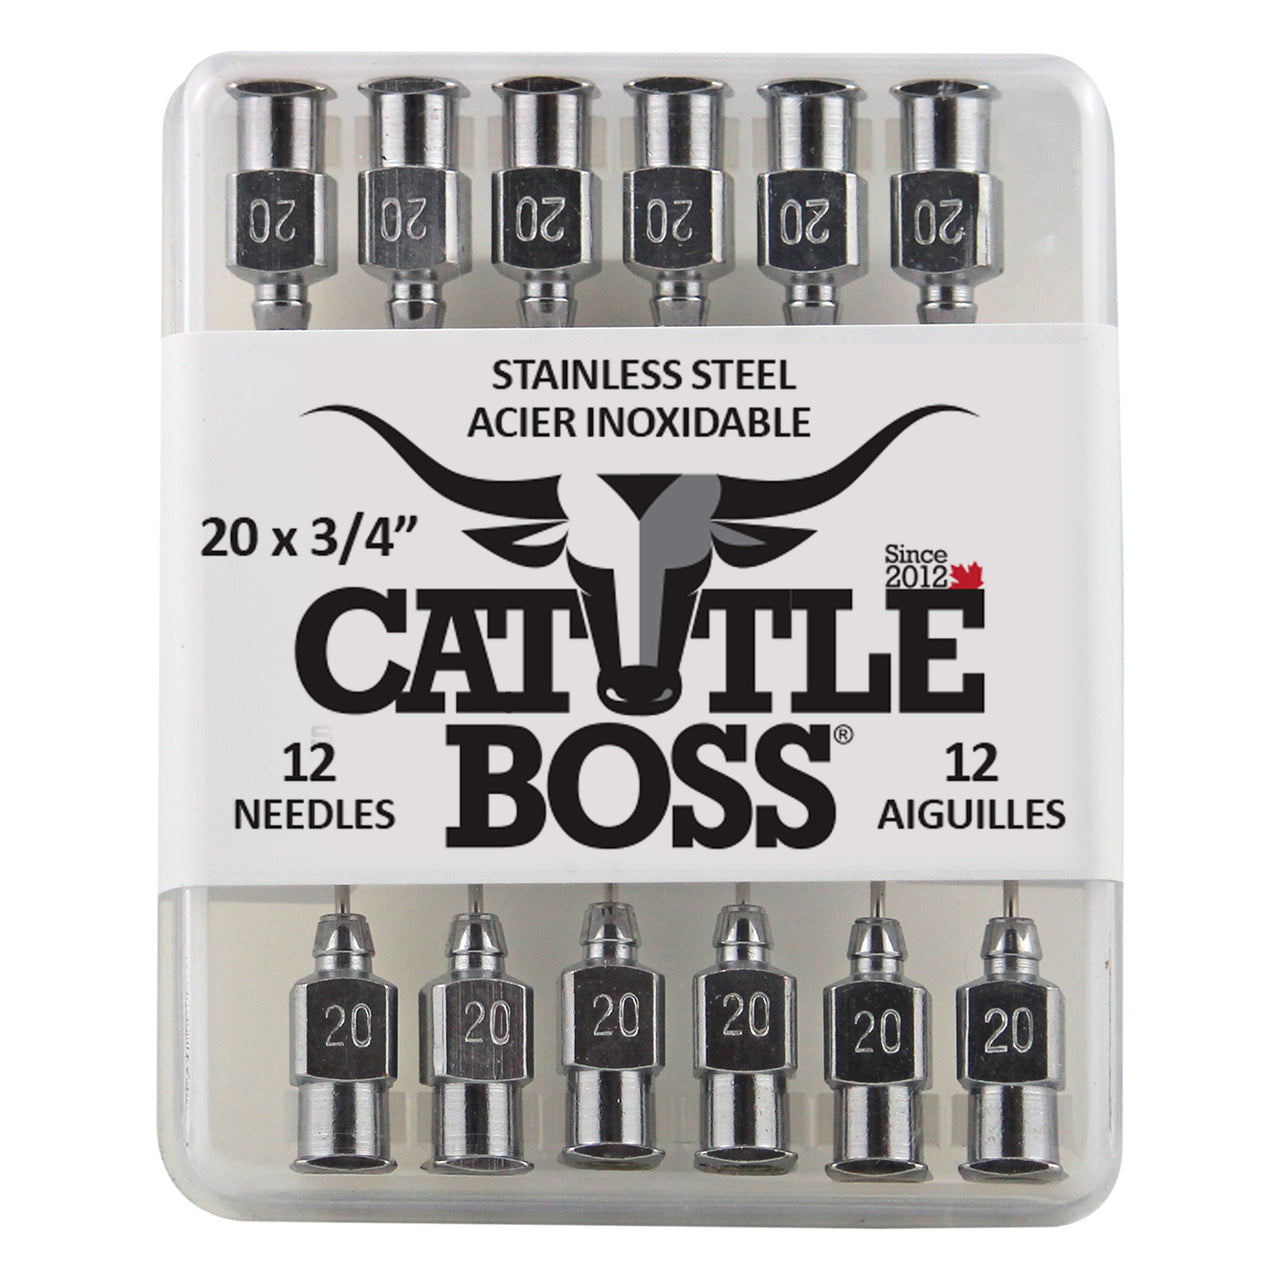 Cattle Boss Stainless Steel Hub Needle (12 Pack) 20X3/4 - Drug Administration Cattle Boss - Canada